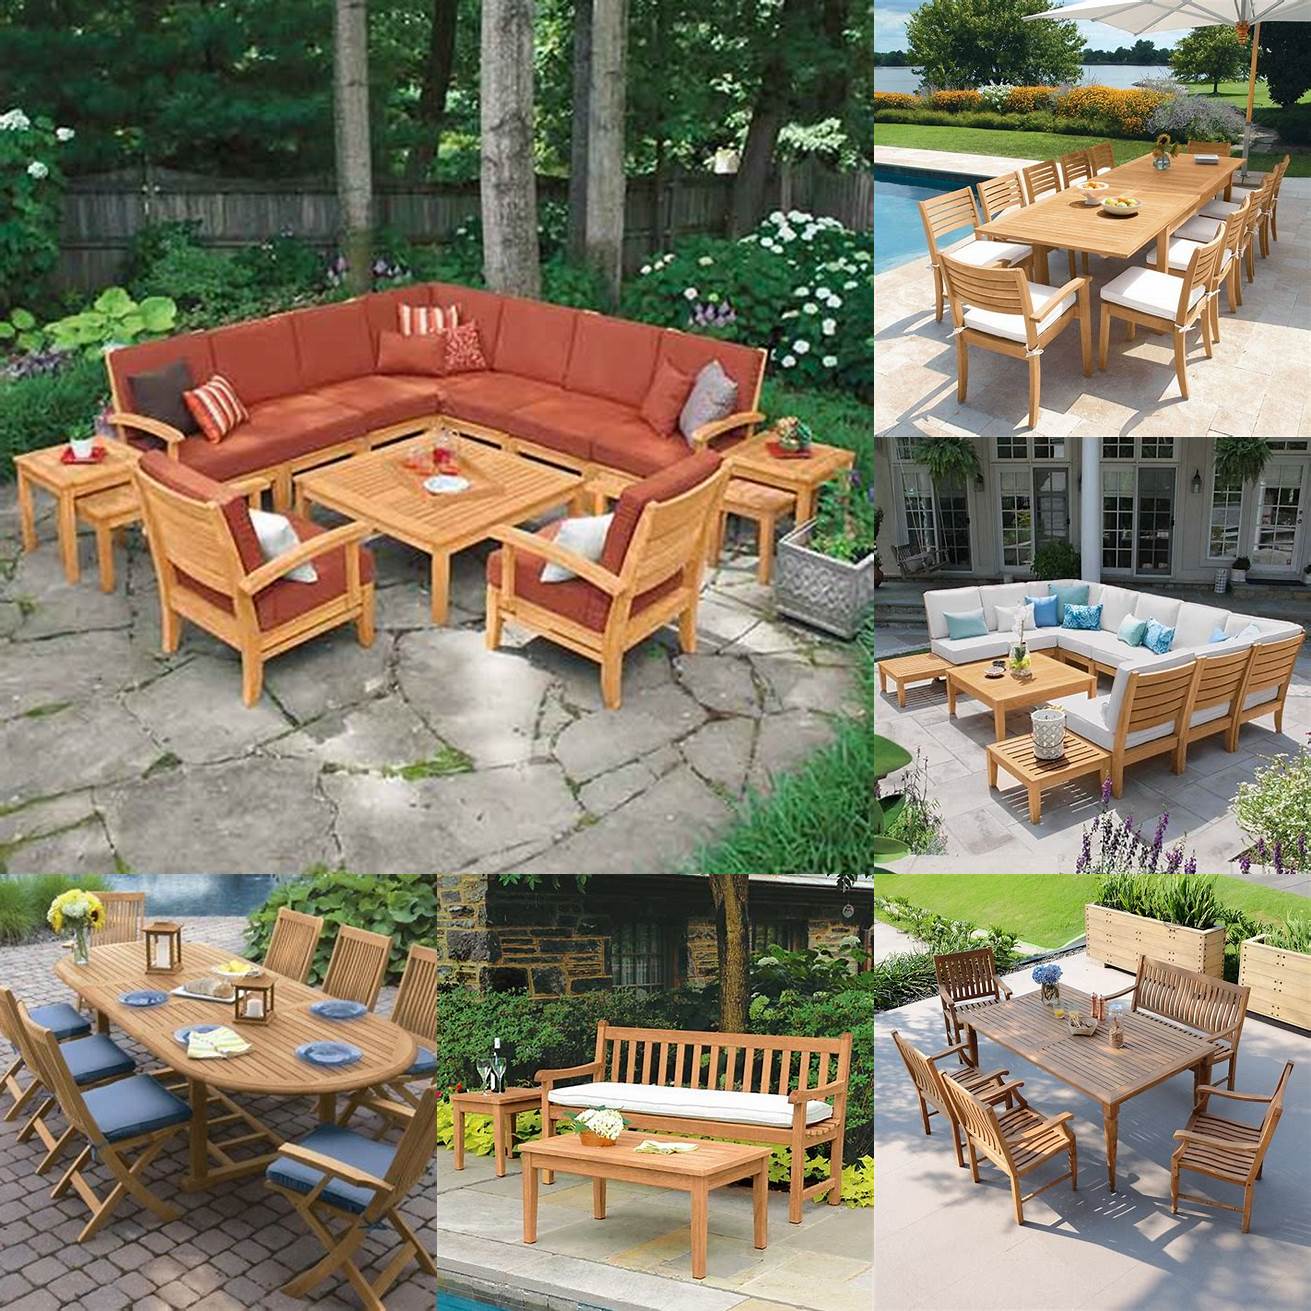 Country Casual Teak Furniture on a patio